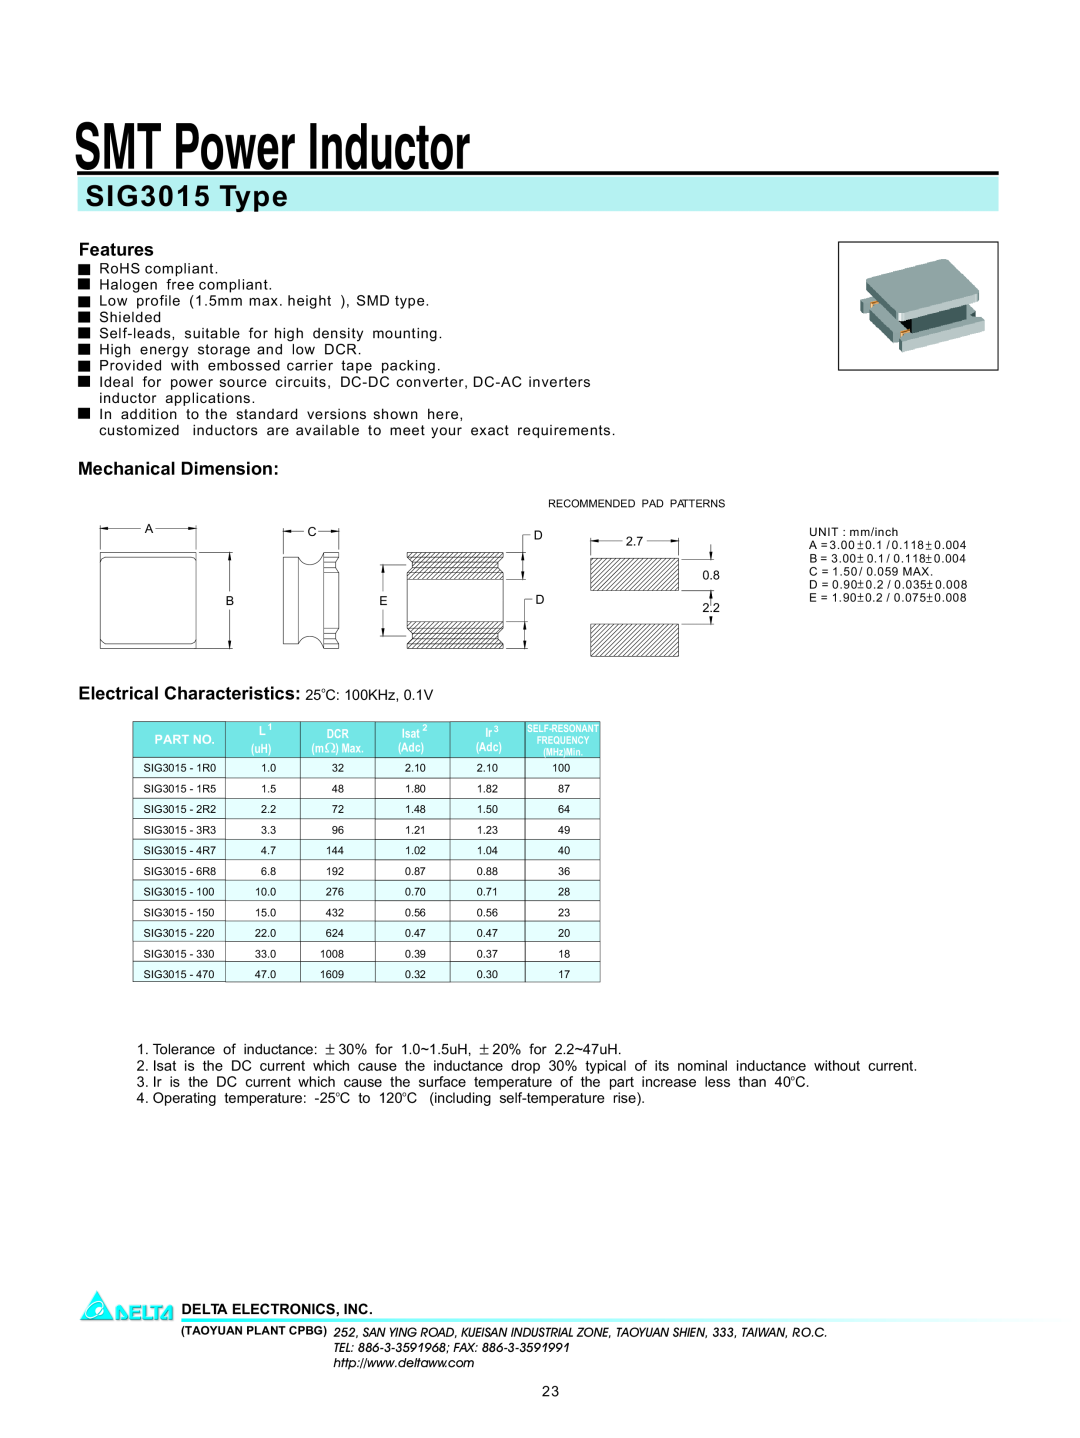 Delta Electronics manual SMT Power Inductor, SIG3015 Type, Features, Mechanical Dimension, Delta Electronics, Inc 